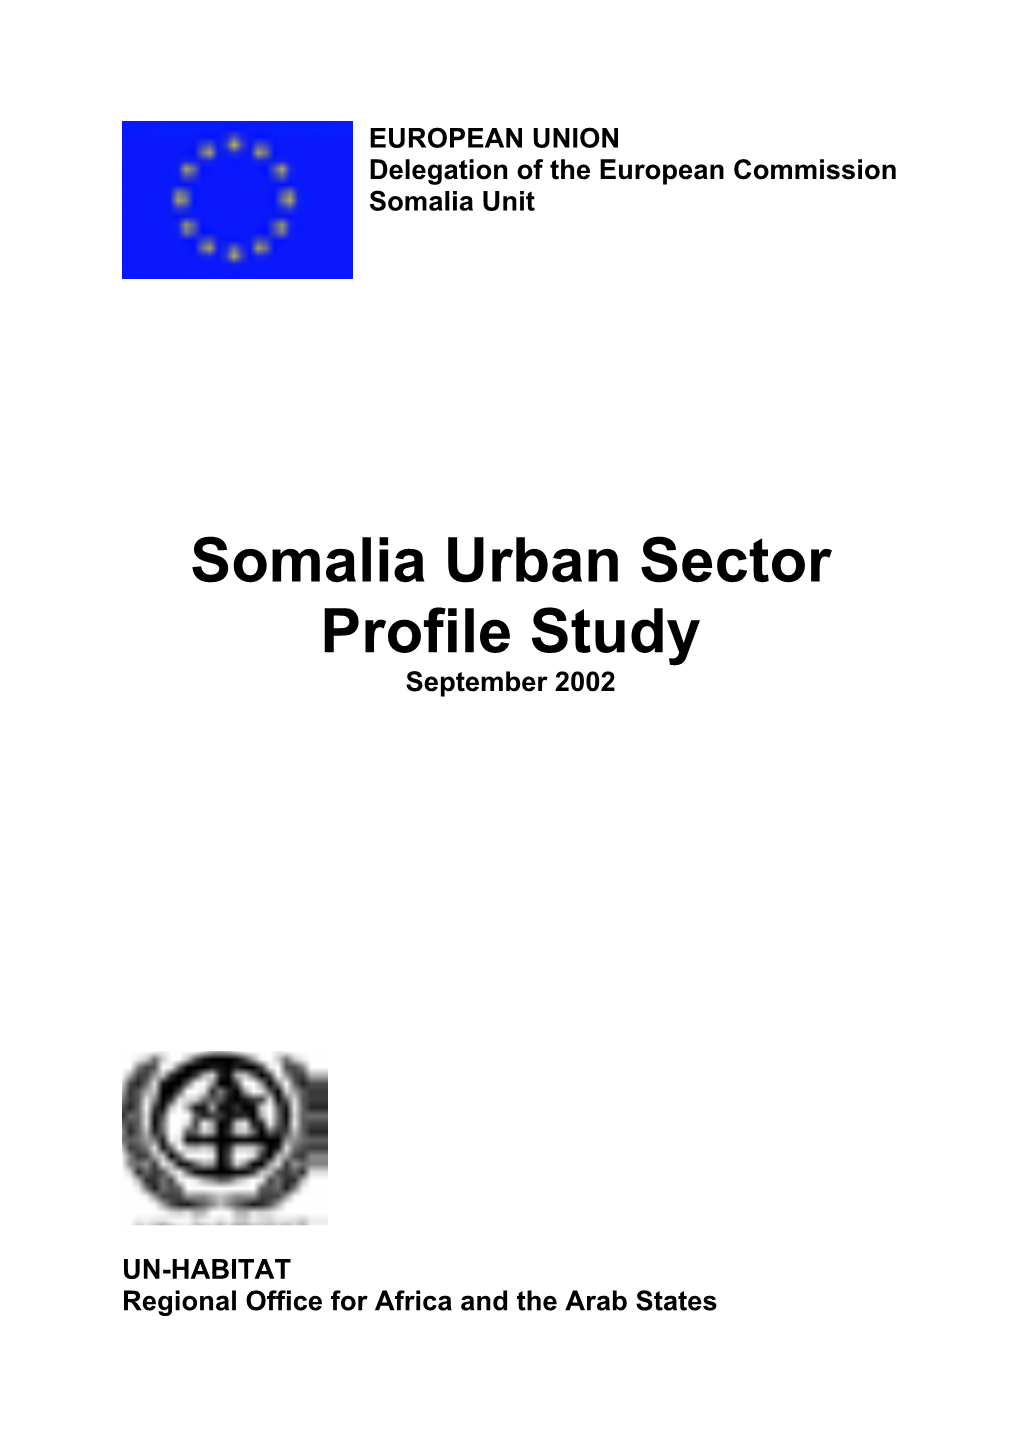 This Report Is Financed by the European Development Fund and Implemented by the United Nations Human Settlements Programme (UN-HABITAT)